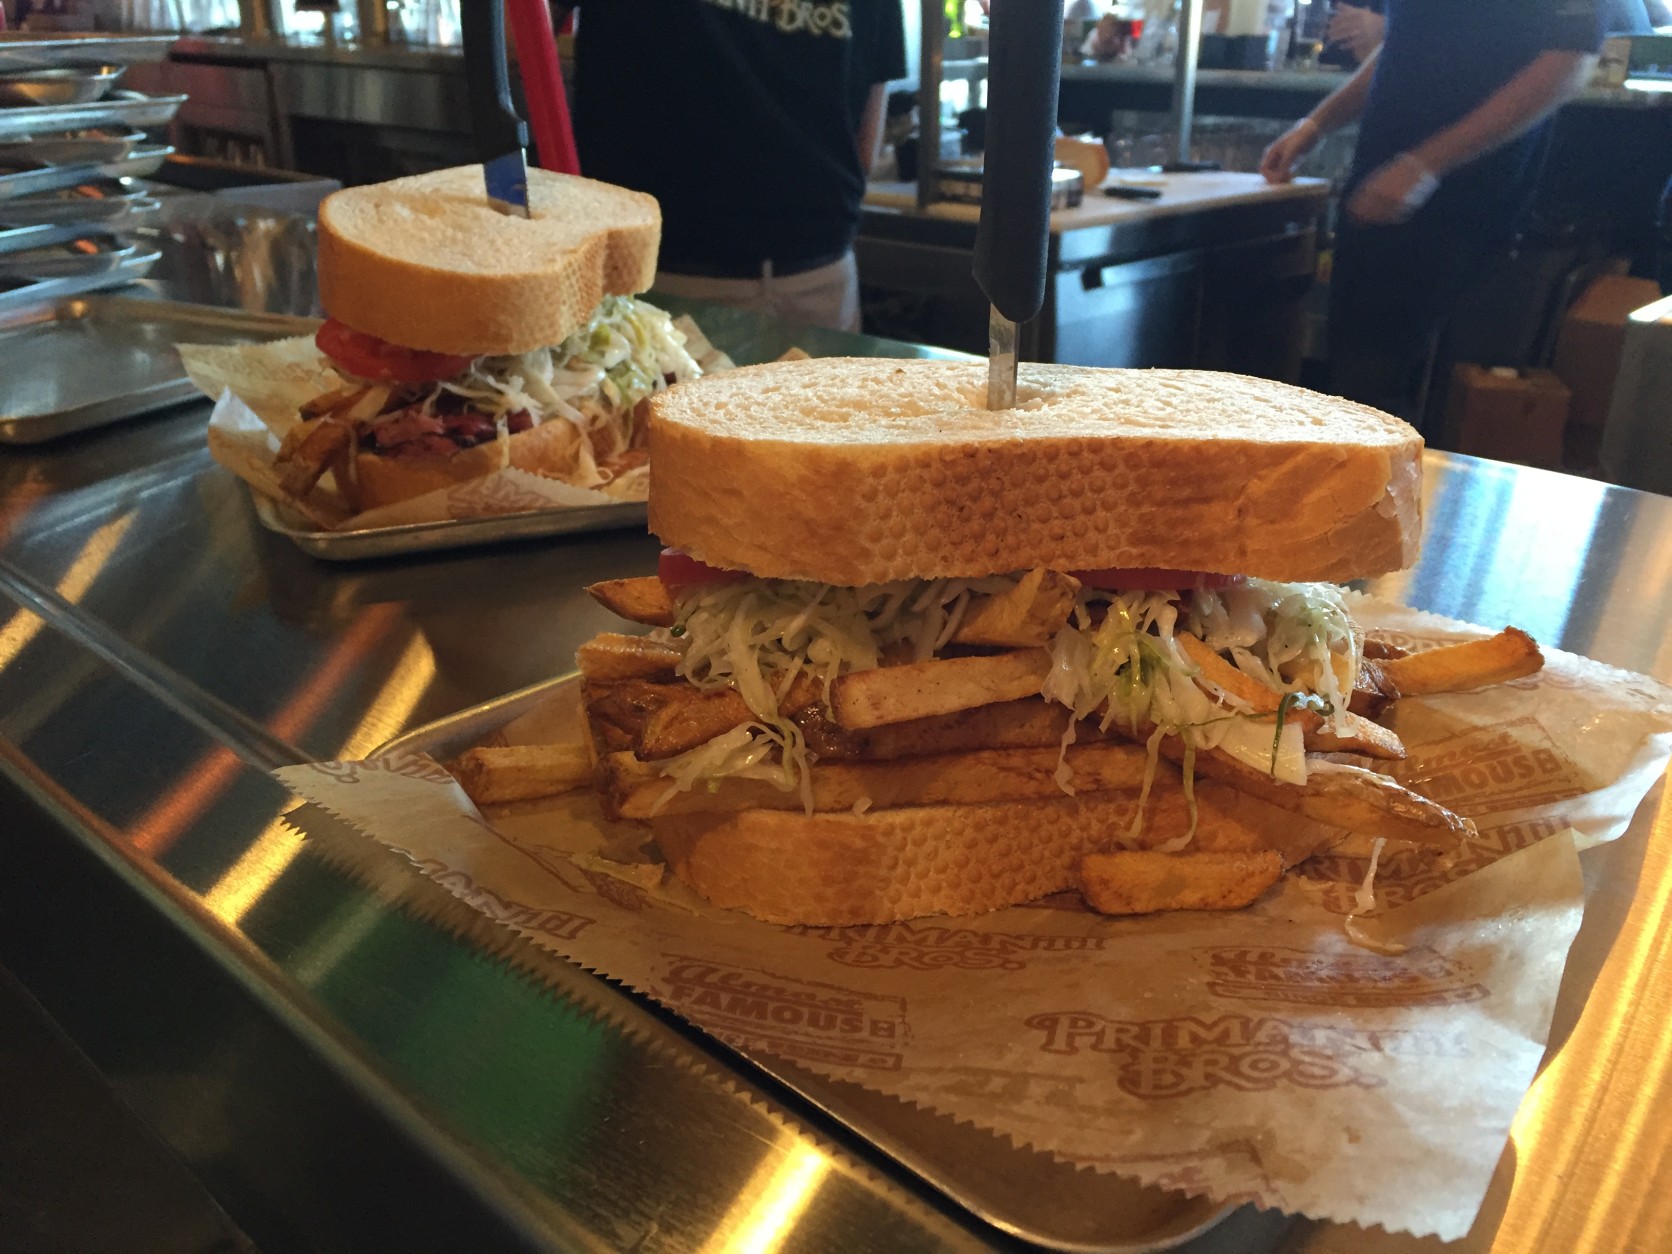 Two sandwiches spilling over with fries and coleslaw. Good luck finishing the whole thing in one sitting. (WTOP/Michelle Basch)